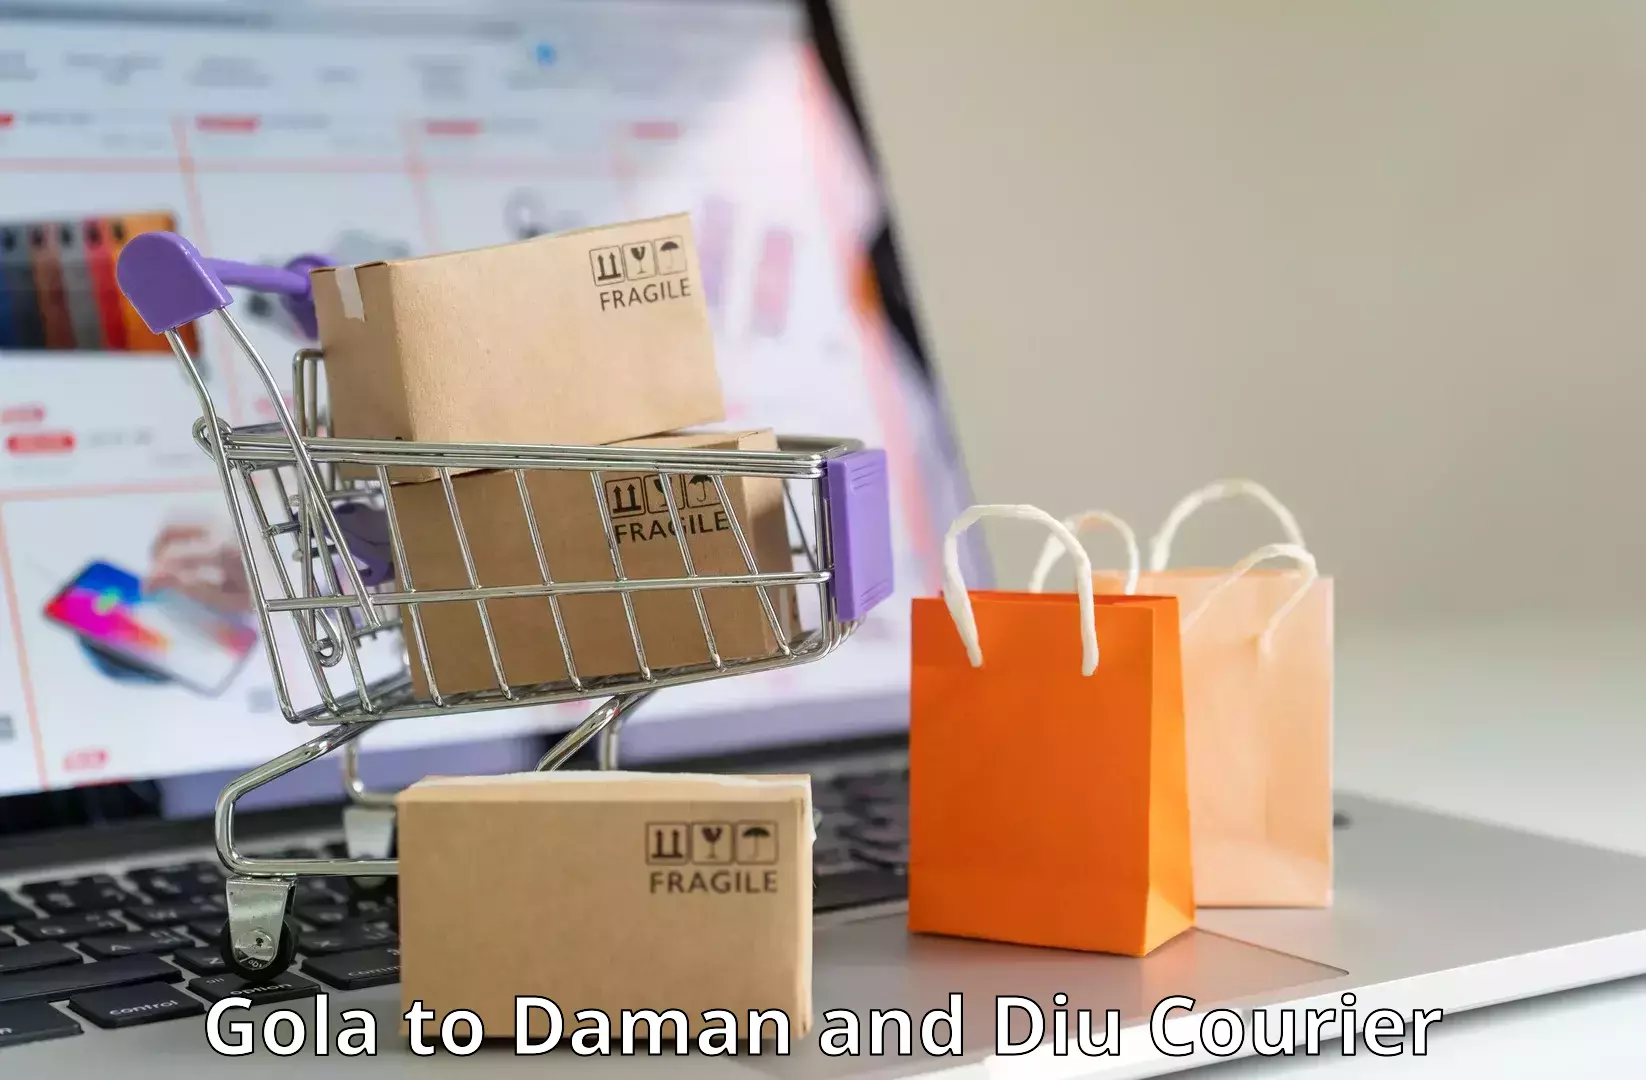 Premium courier solutions Gola to Daman and Diu